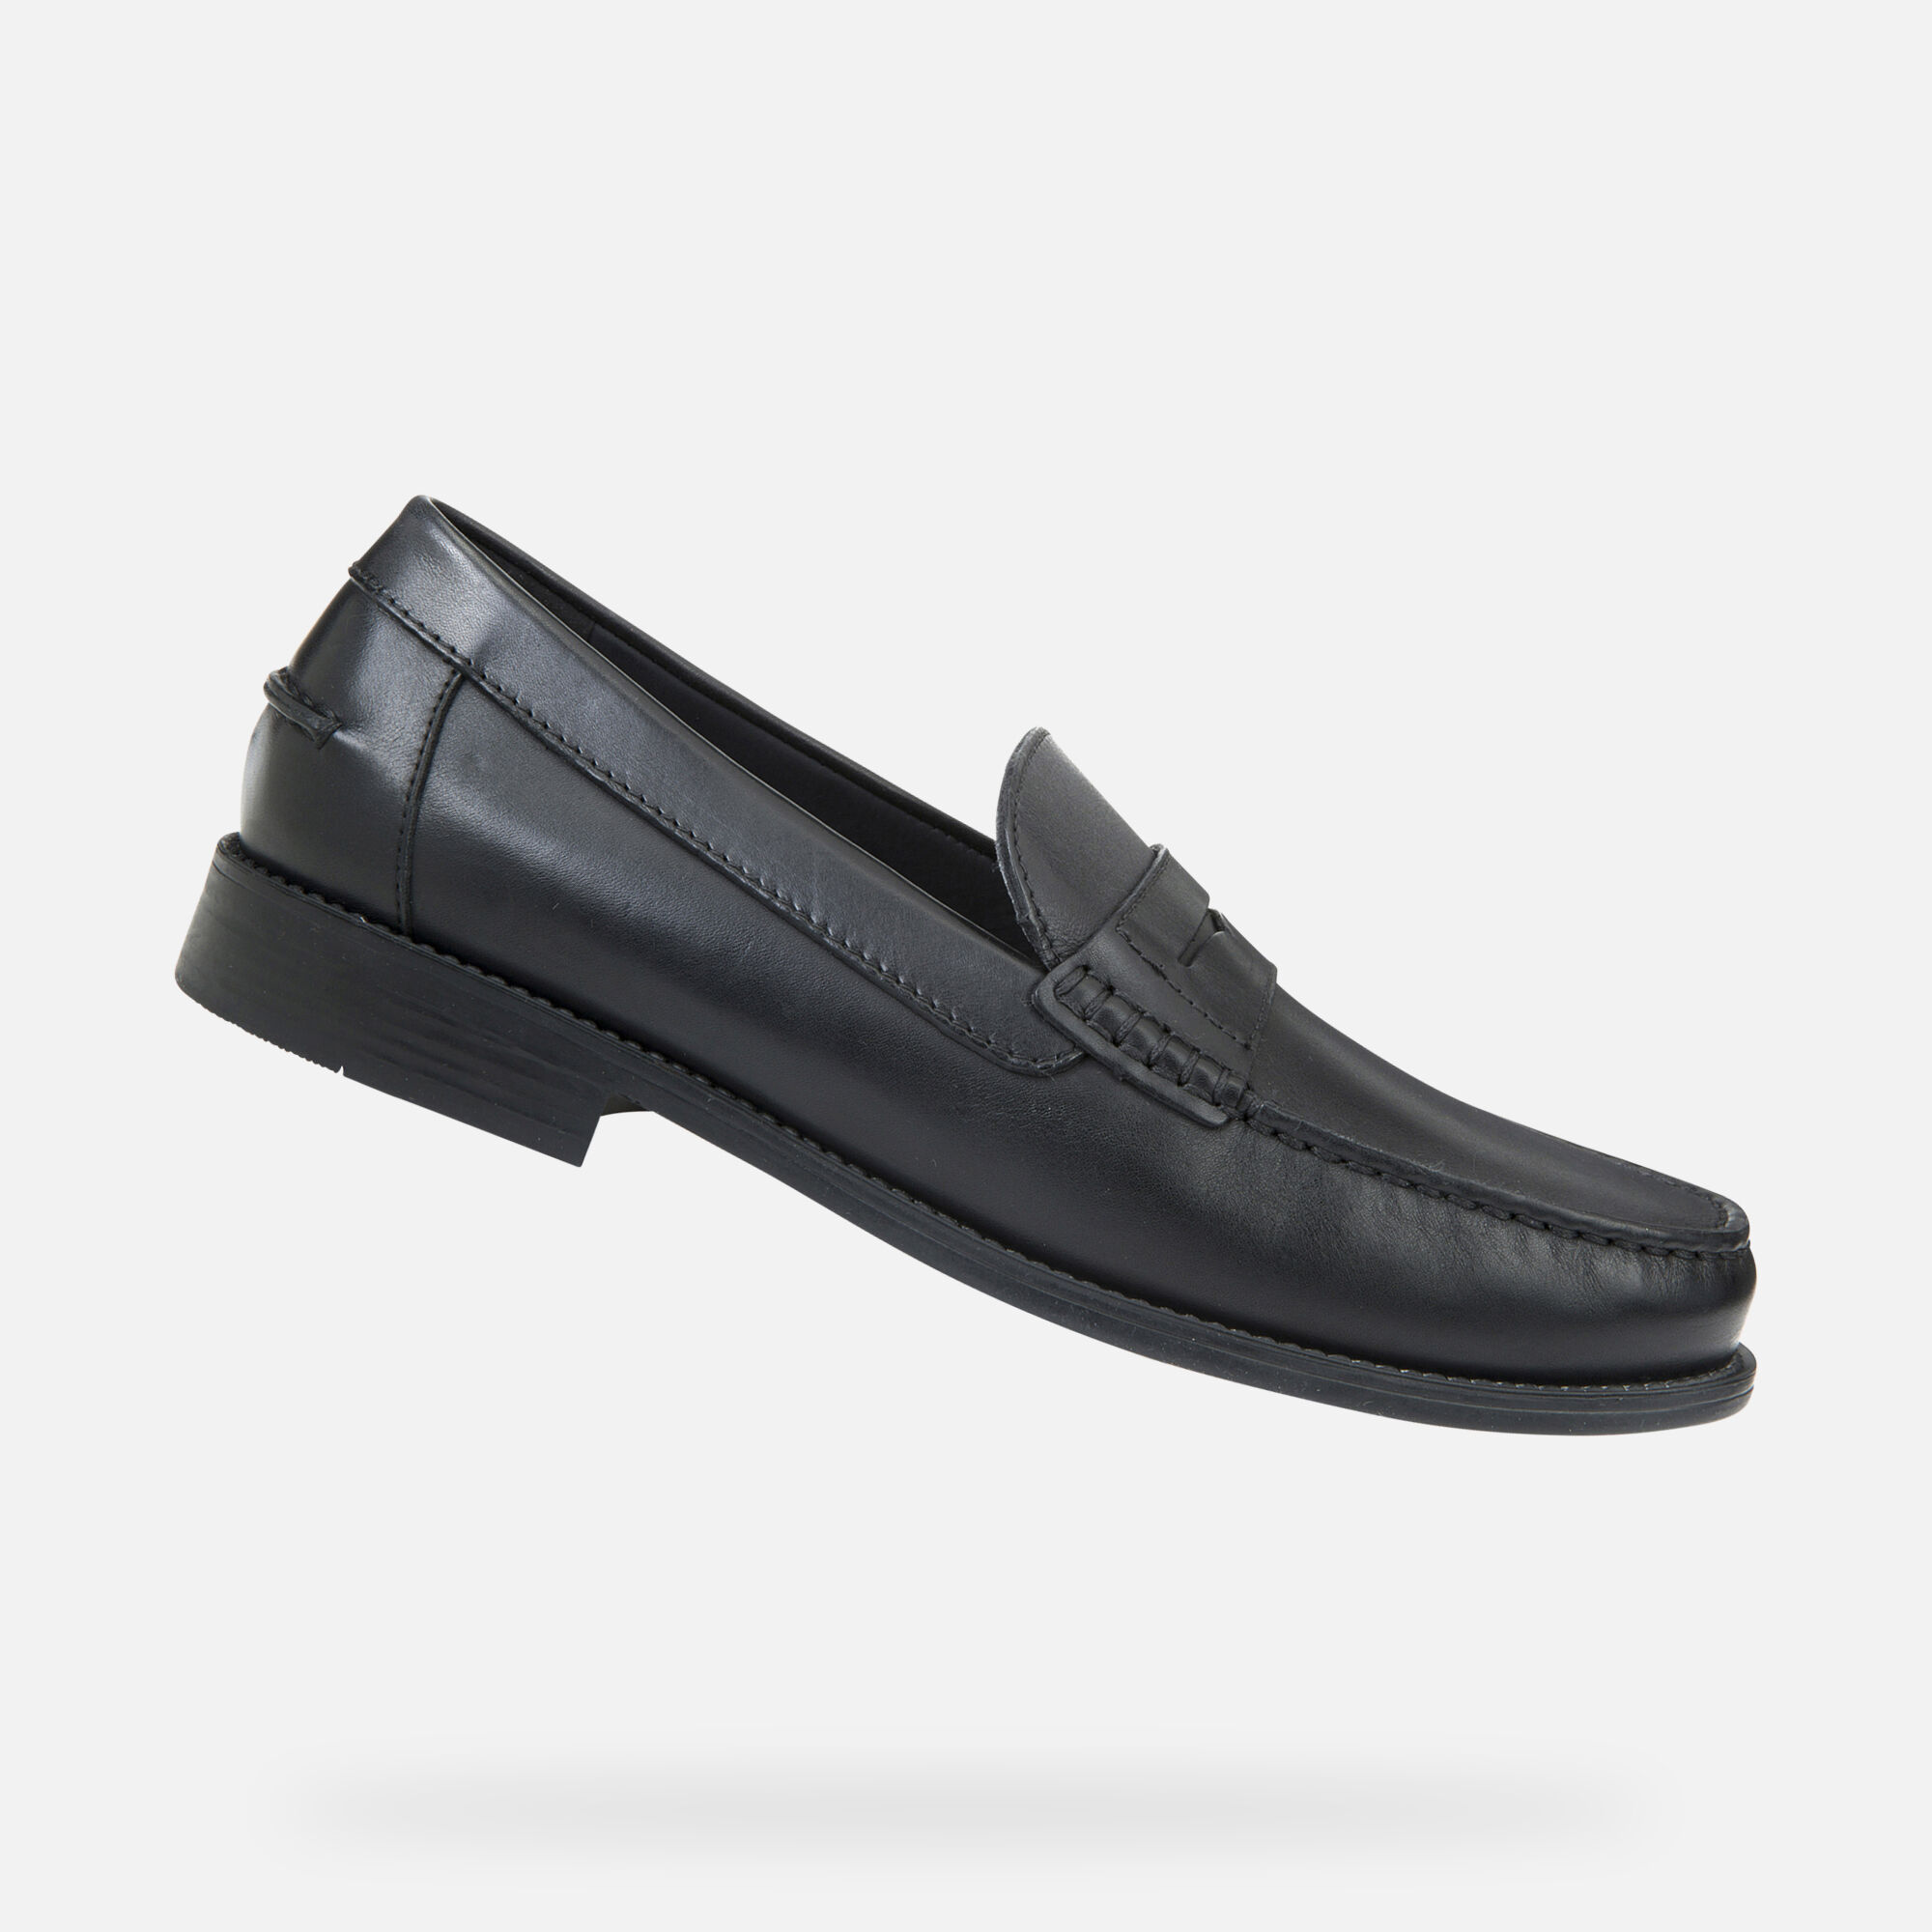 breathable loafers